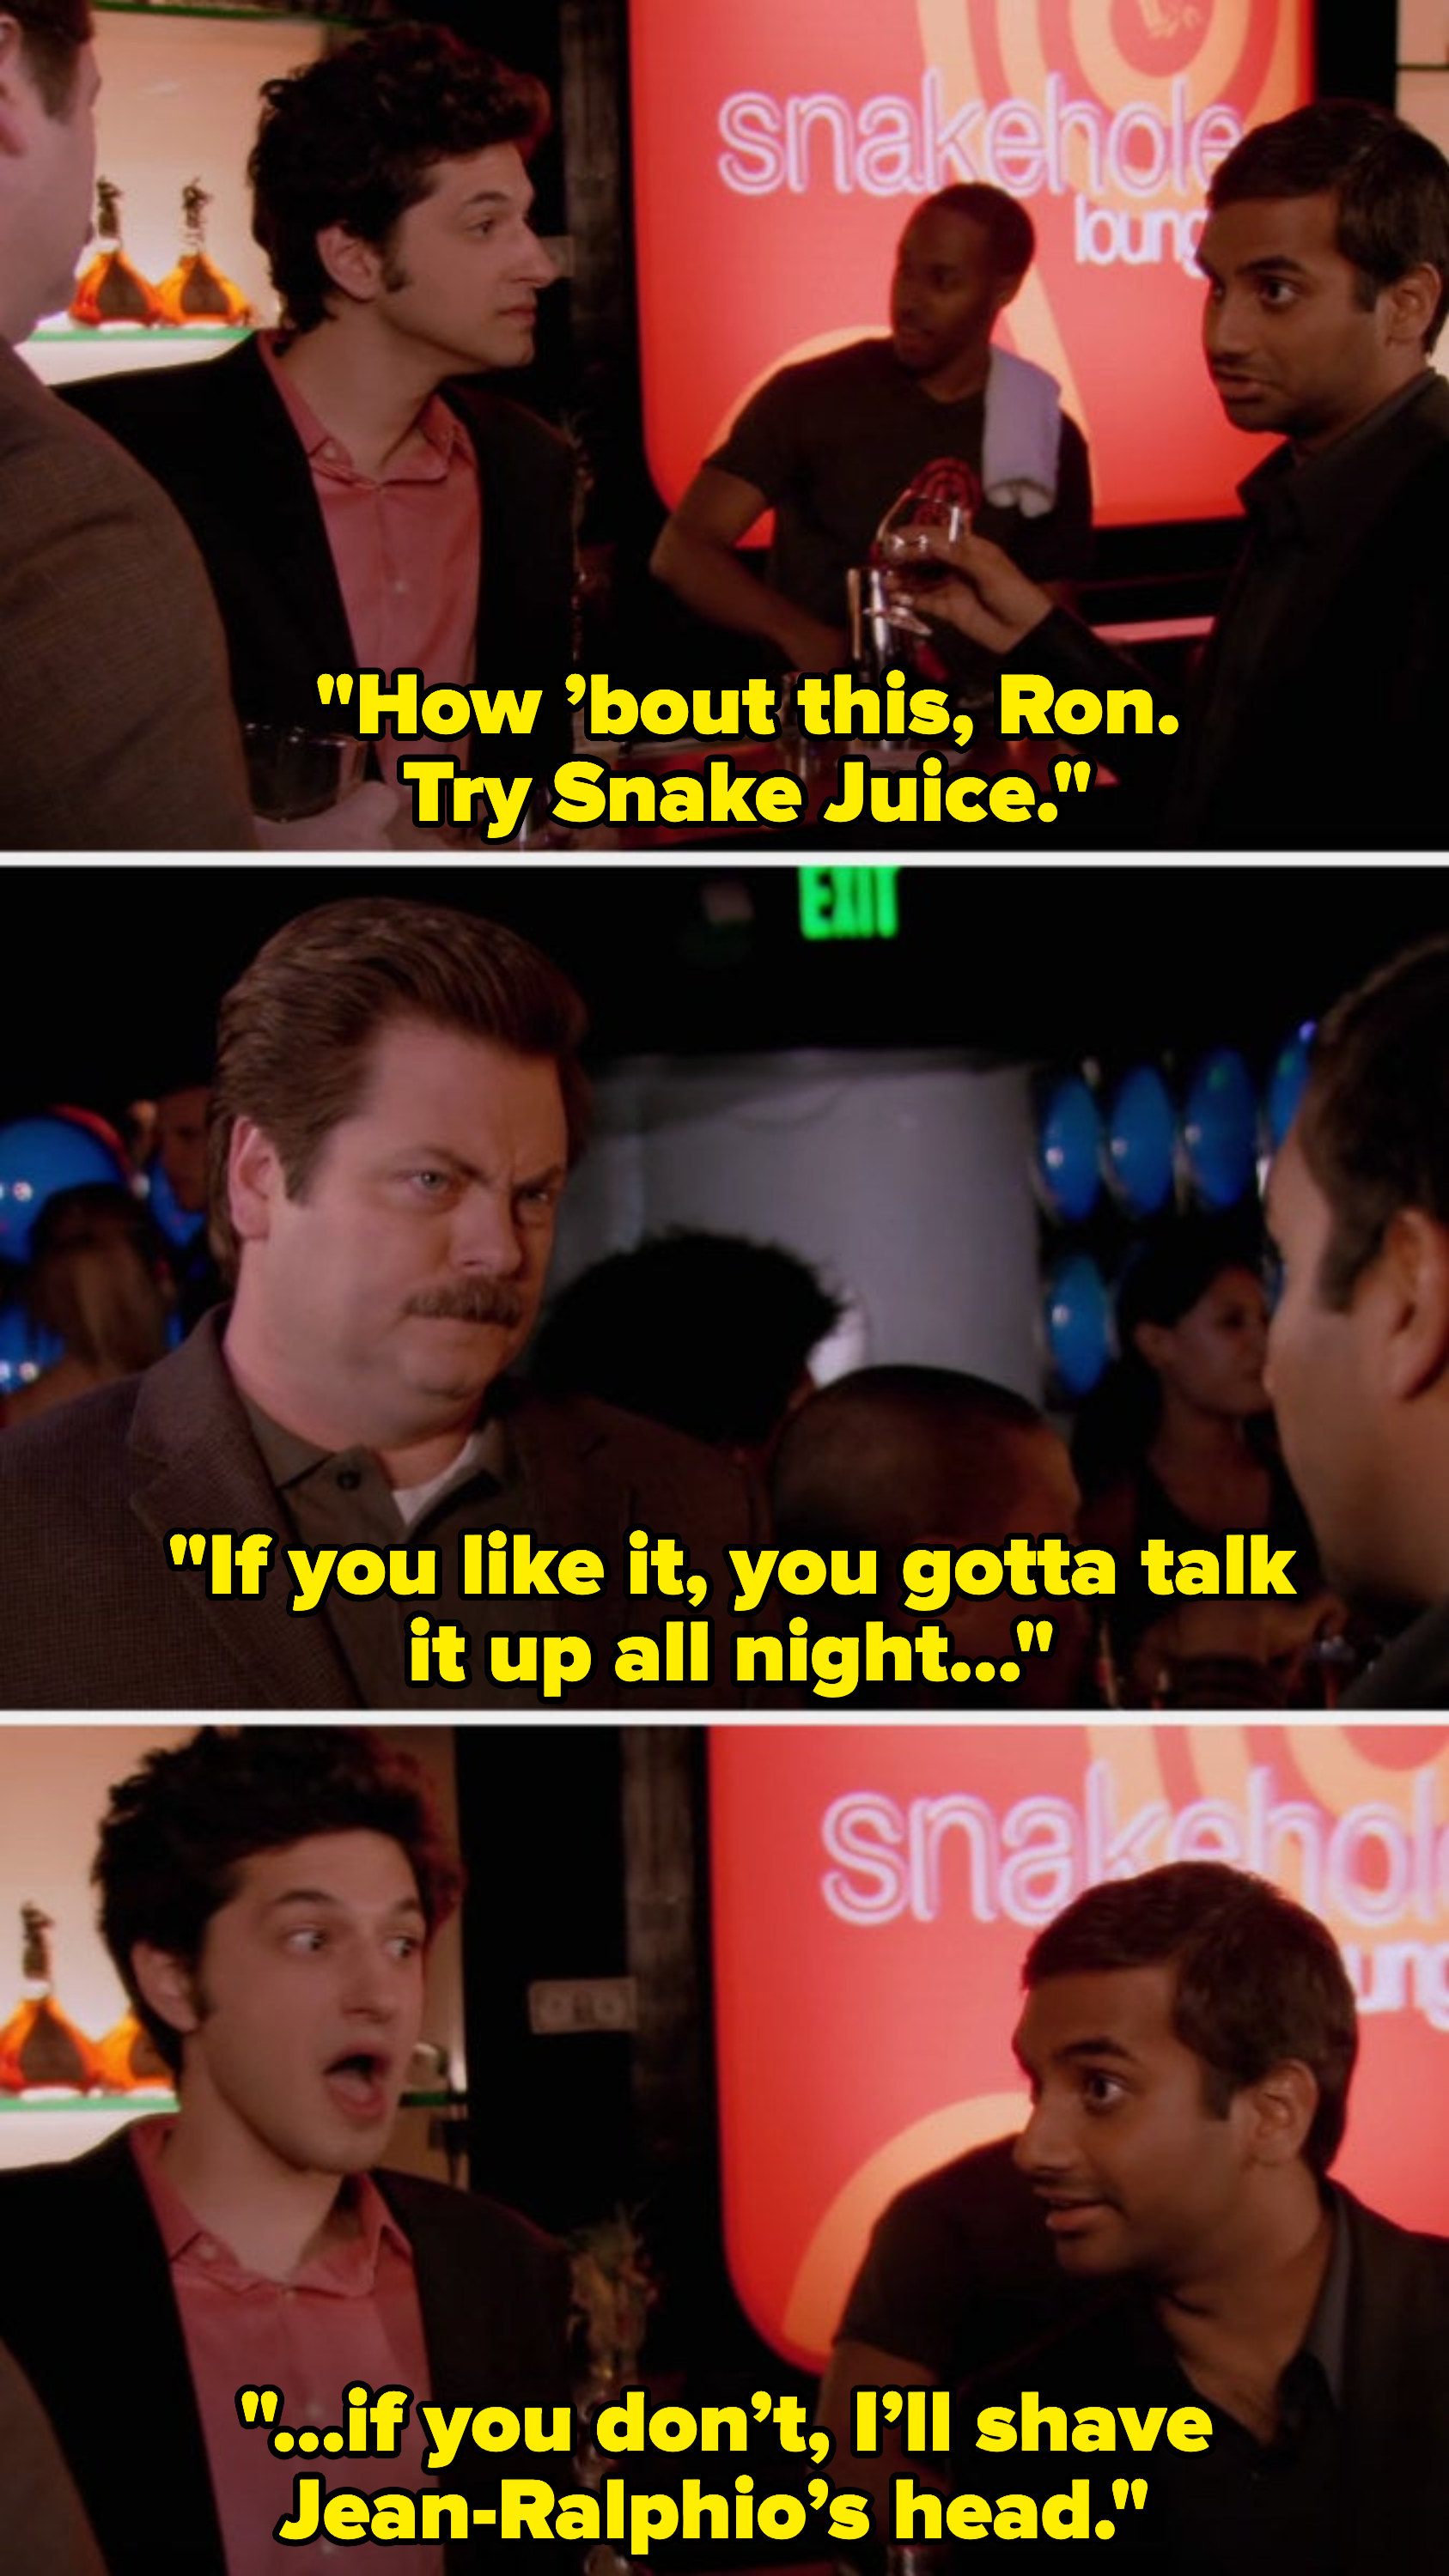 Man tells another to try Snake Juice, and he likes it, he&#x27;s gotta talk it up all night